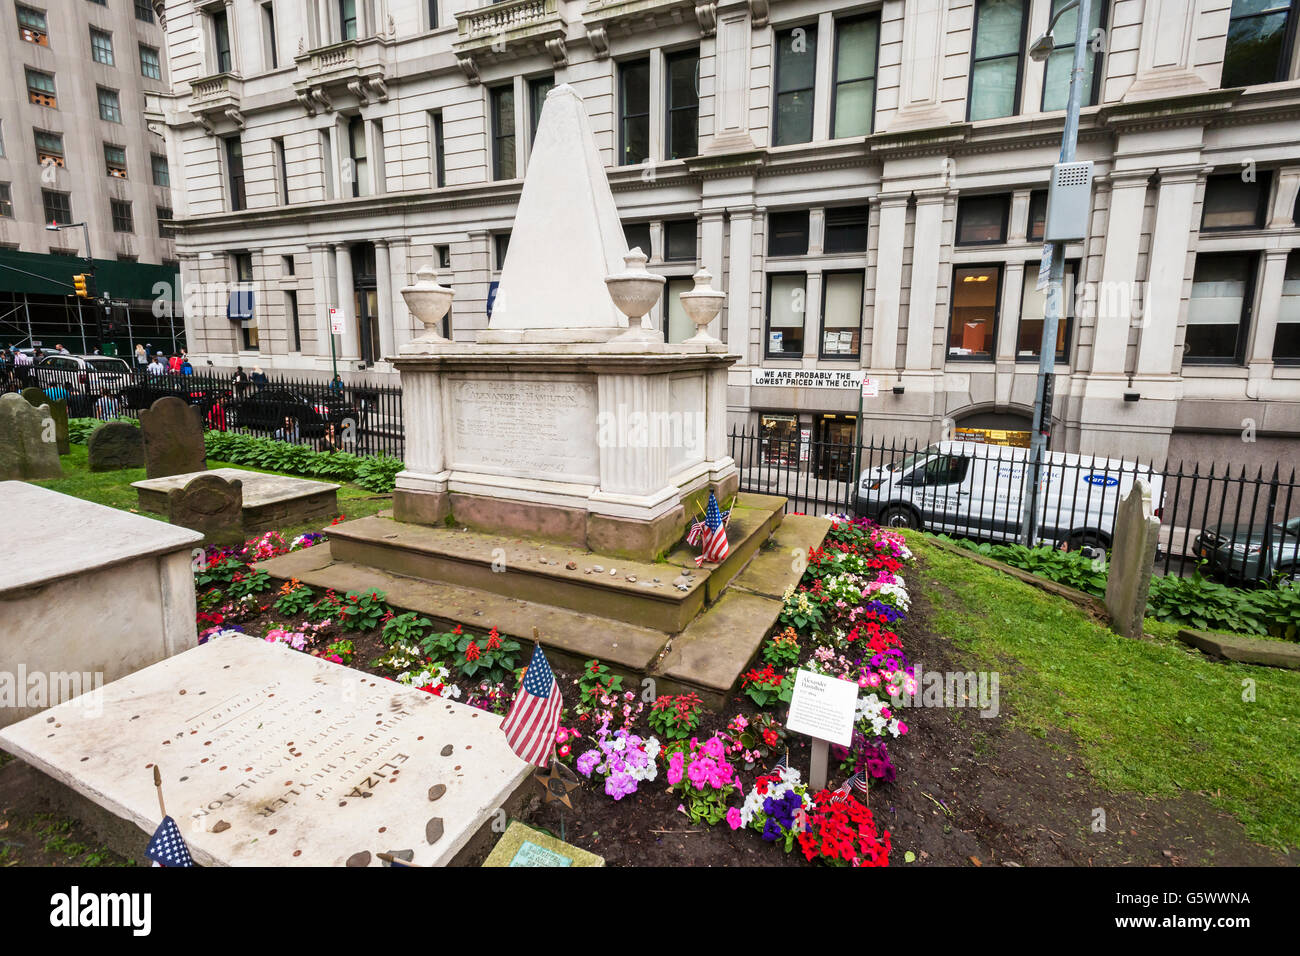 The grave of Alexander Hamilton in Trinity Church's cemetery in the Financial District of New York on Thursday, June 16, 2016. Because of the success of the musical 'Hamilton' on Broadway sites associated with him have seen an increase in interest and tourist traffic. (© Richard B. Levine) Stock Photo